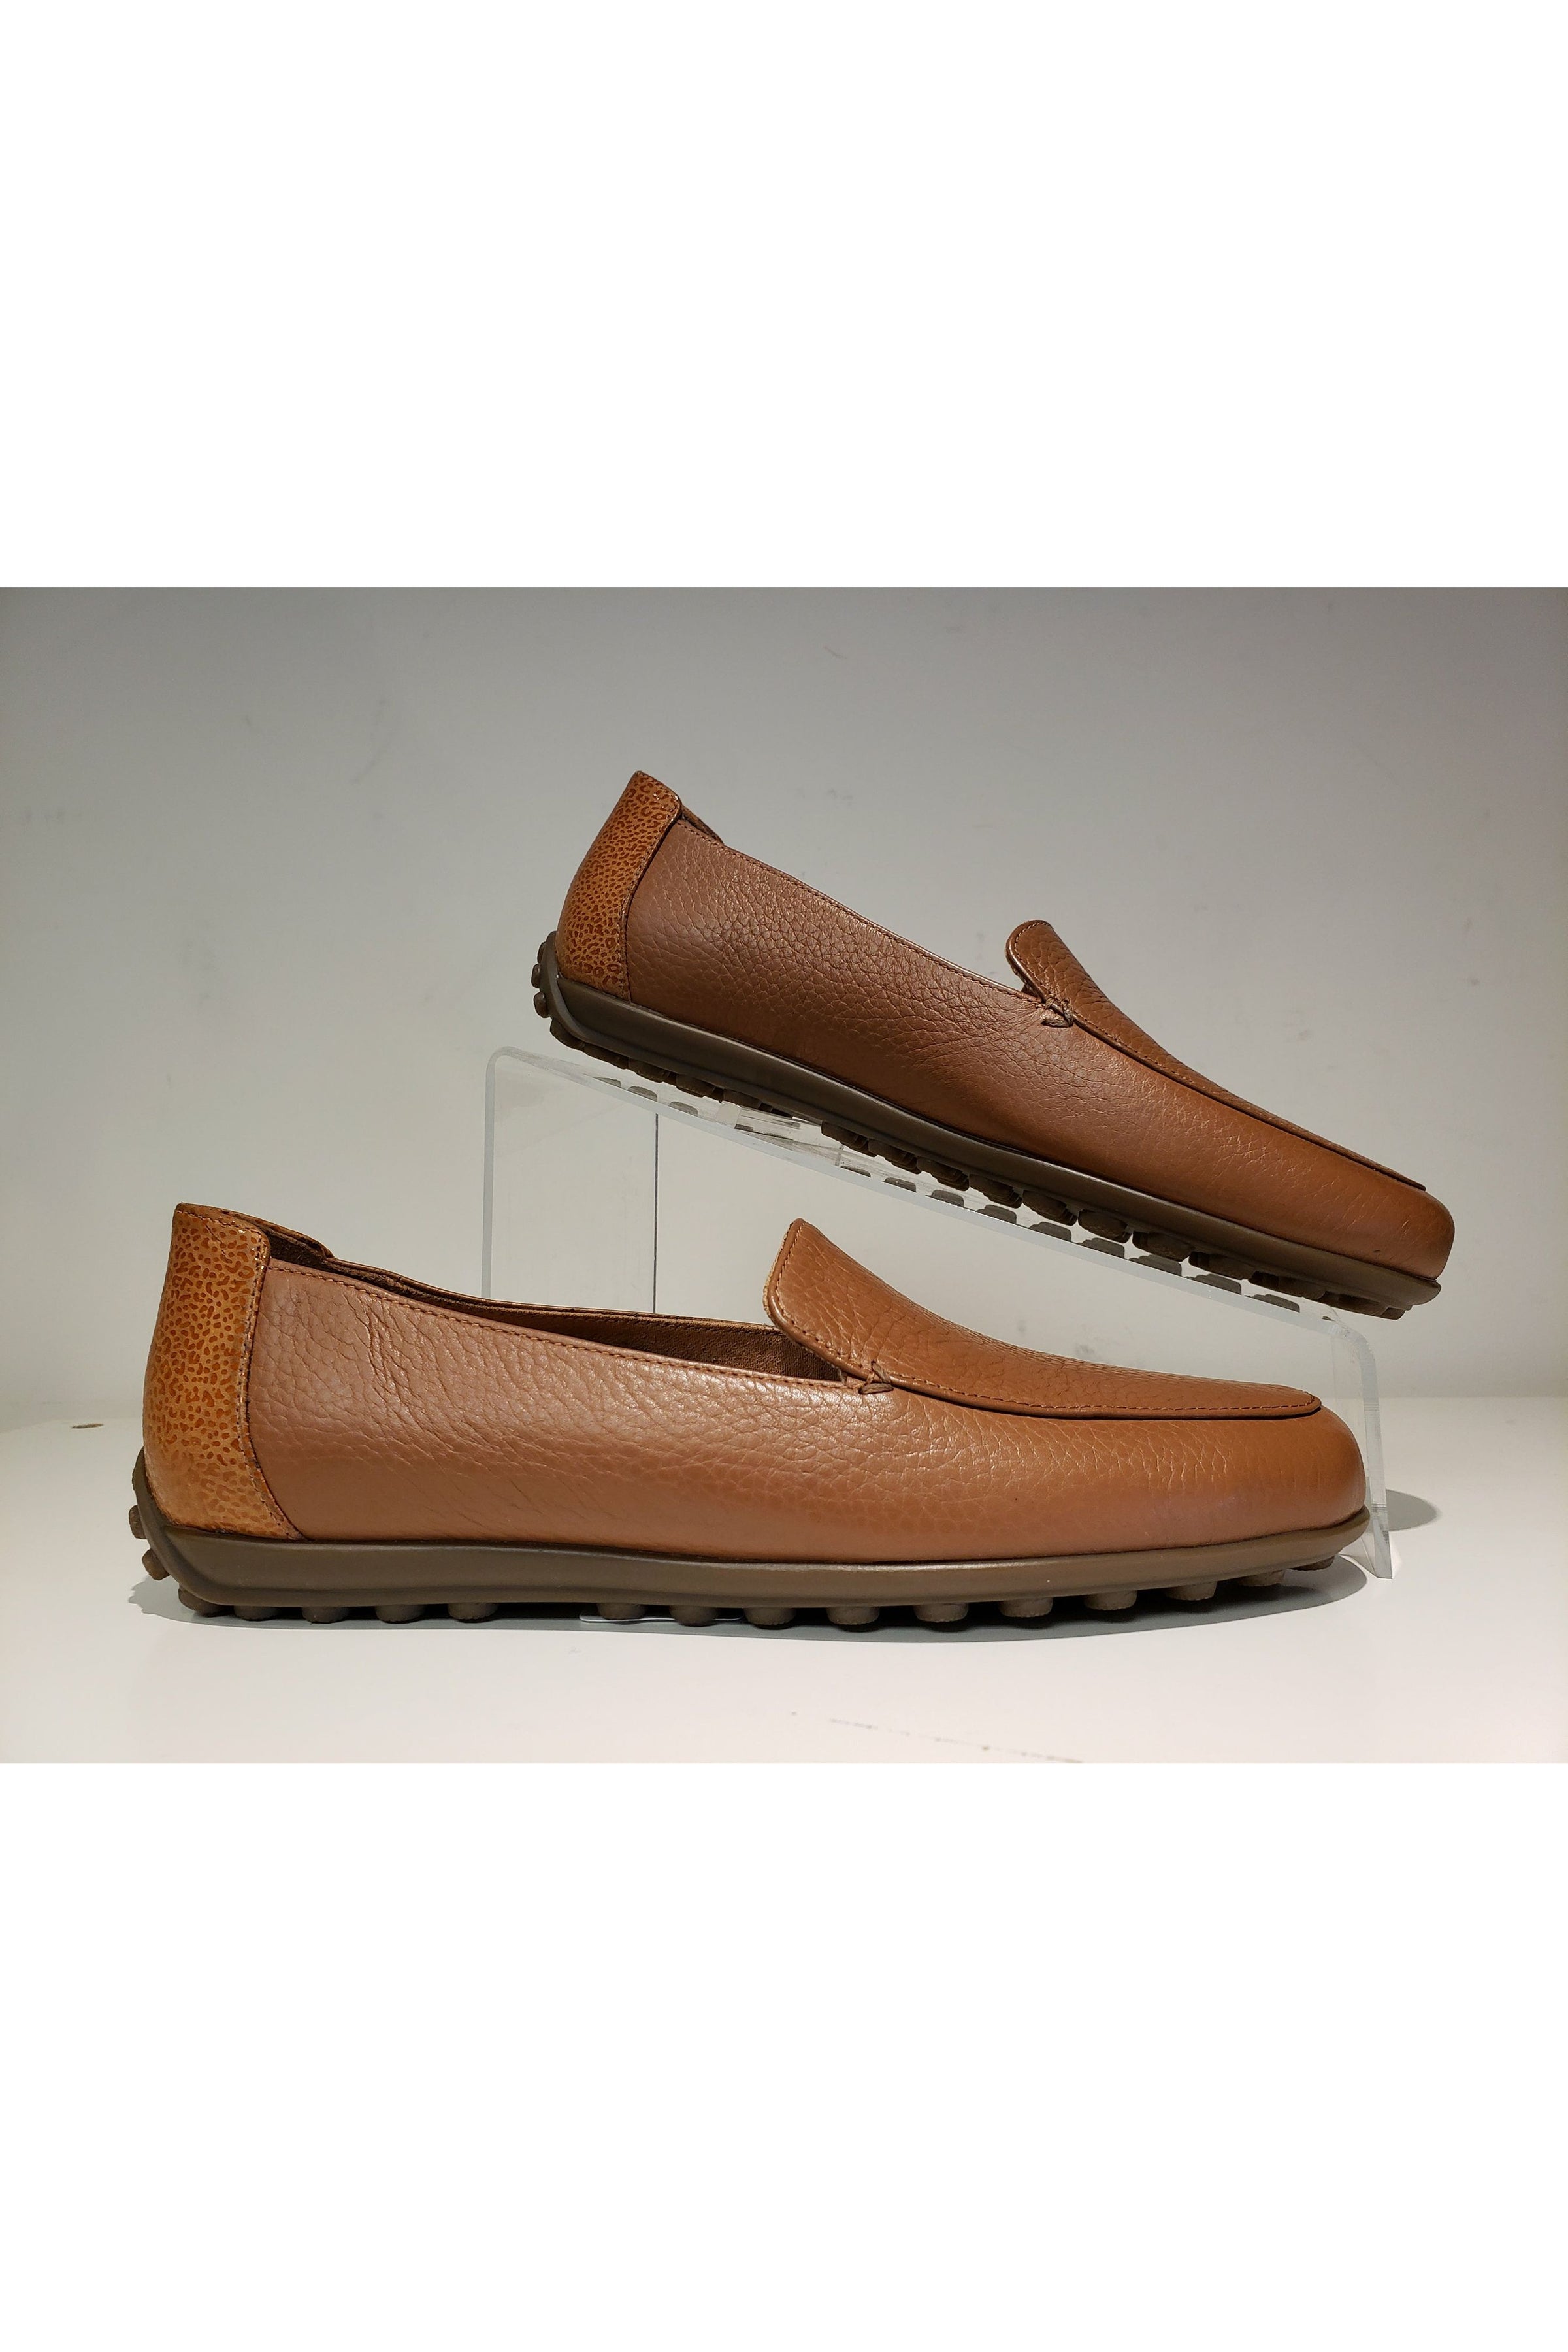 Vionic Elora Flat Loafer - Style 12010L1, pair2, toffee